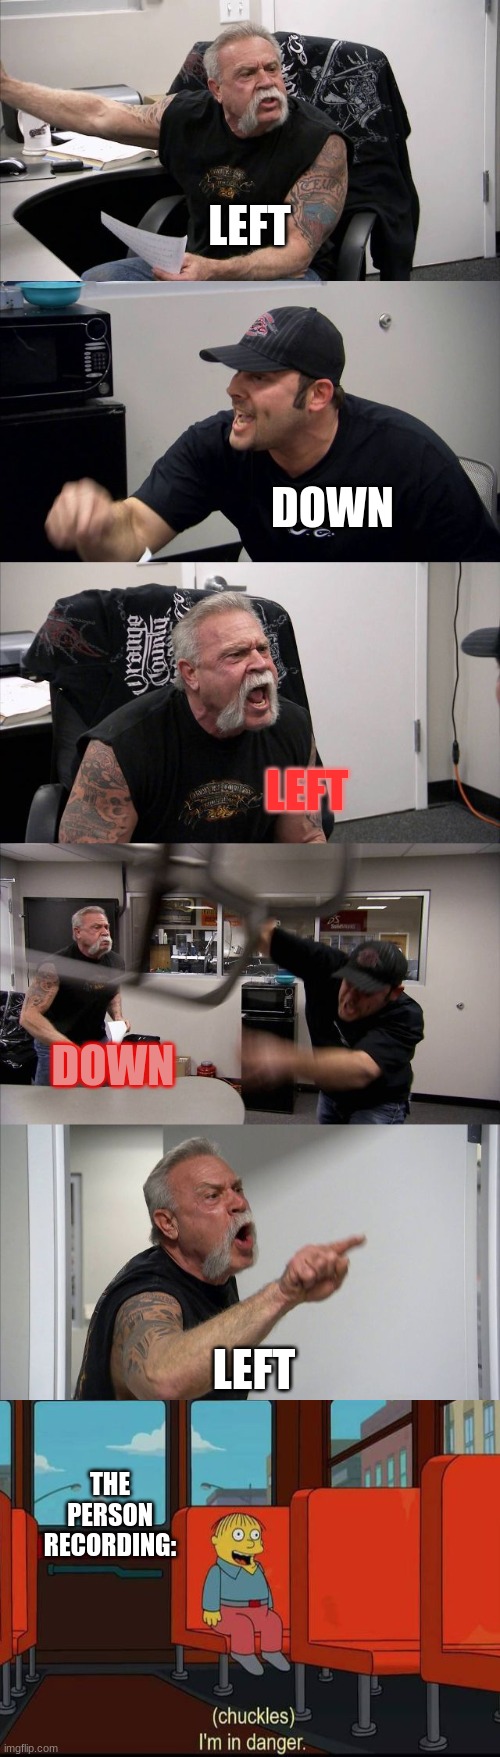 American Chopper Argument Meme | LEFT; DOWN; LEFT; DOWN; LEFT; THE PERSON RECORDING: | image tagged in memes,american chopper argument,chuckles im in danger,lol | made w/ Imgflip meme maker